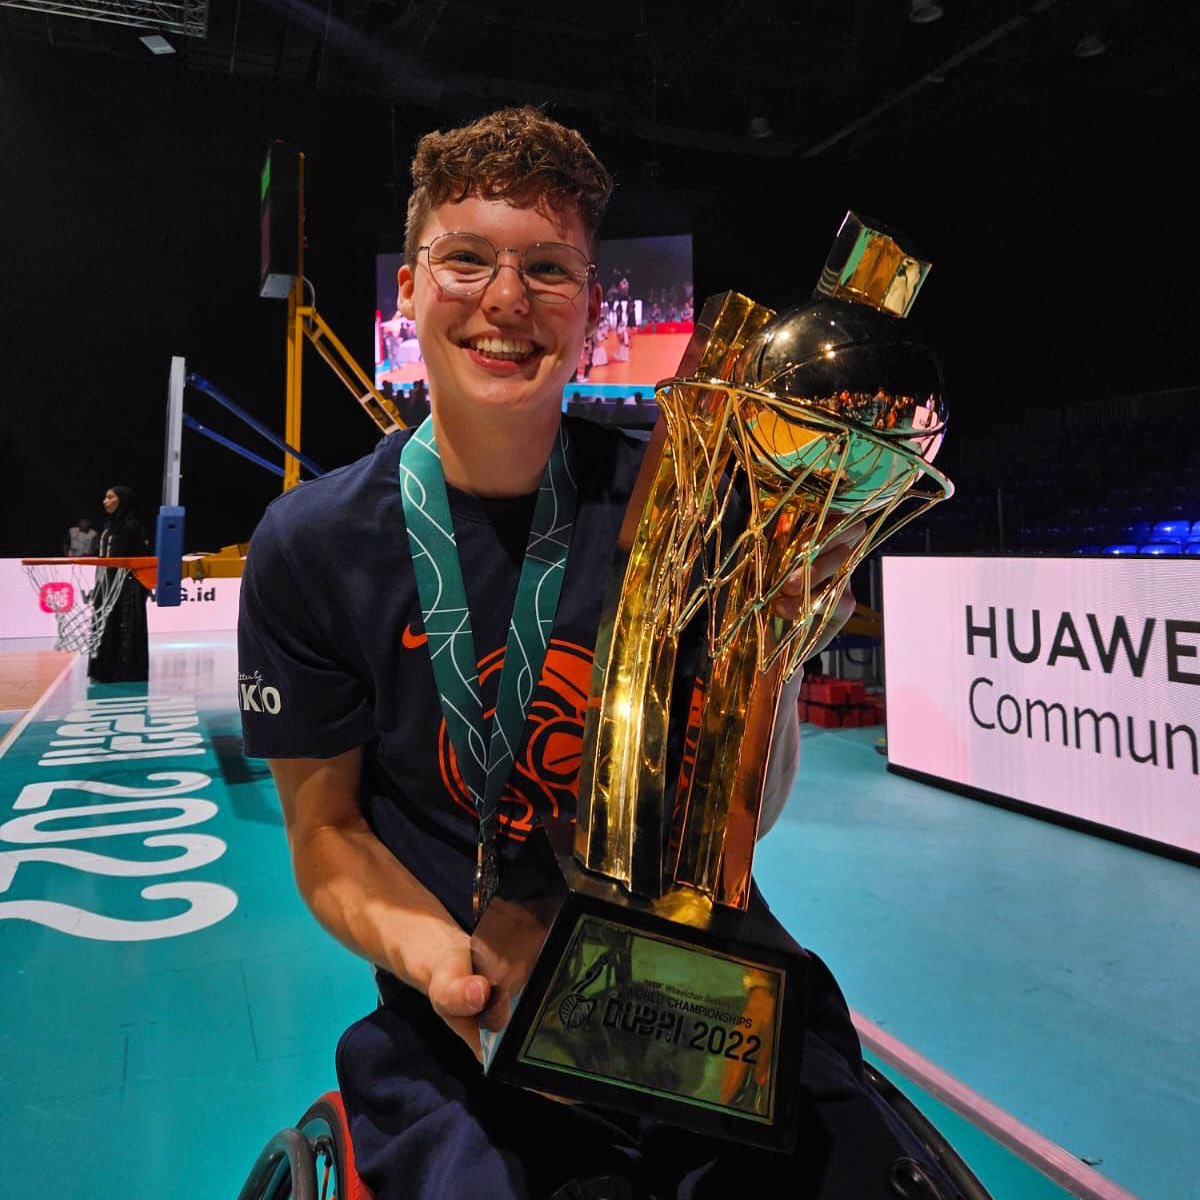 Congratulations to @lightningwbbl player @BoLisaKramer who played part of the team that successfully beat China 57-34 in the final of the Wheelchair Basketball World Championships to become back-to-back World Champions! We’re so proud of your achievements, Bo!💜 #lborofamily